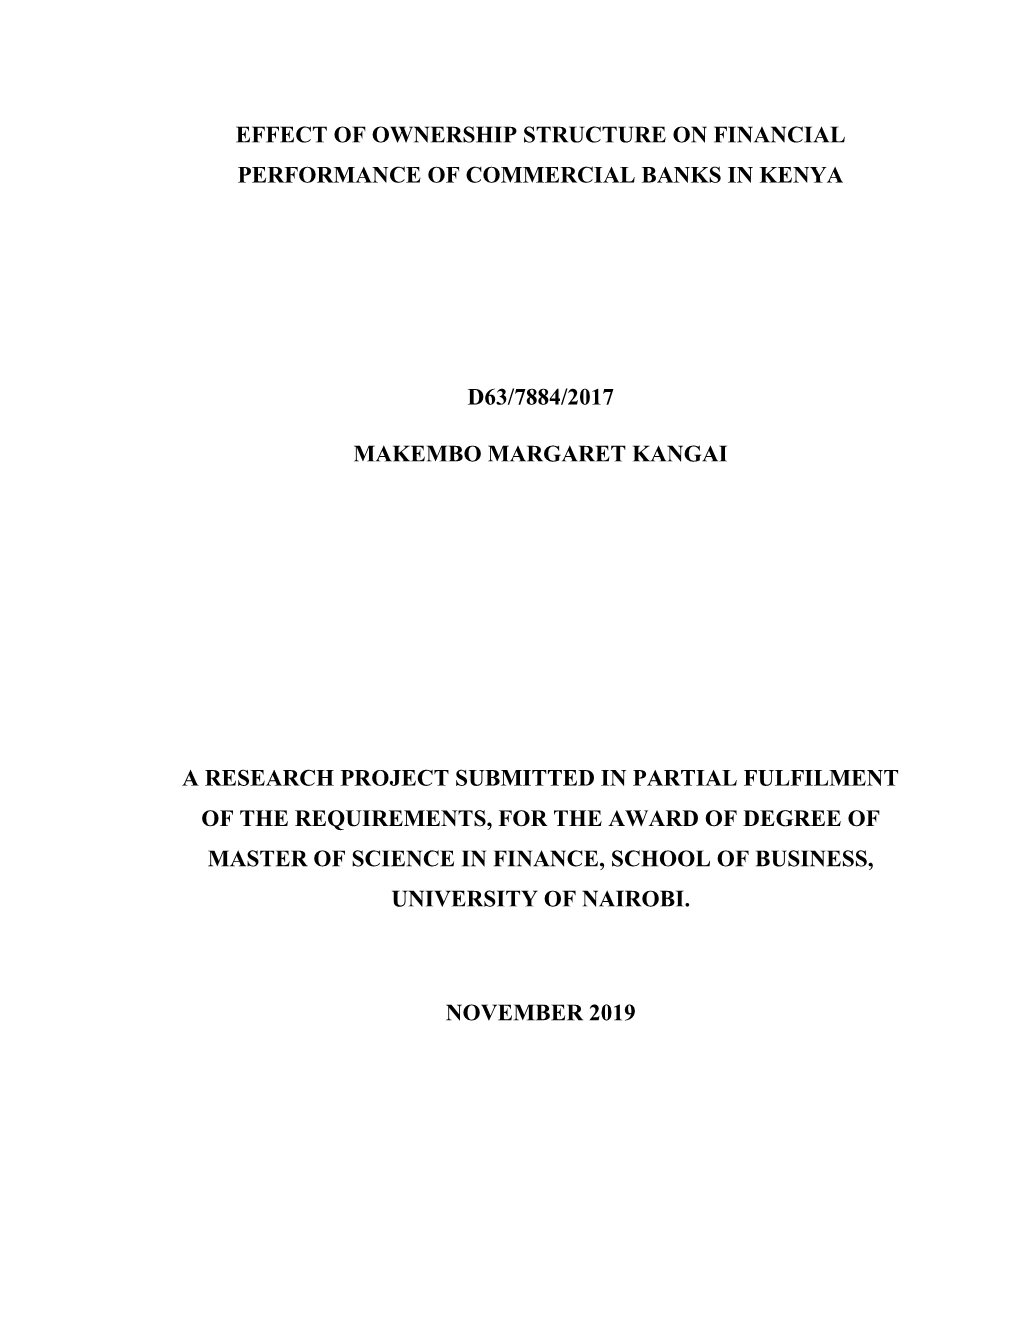 Effect of Ownership Structure on Financial Performance of Commercial Banks in Kenya